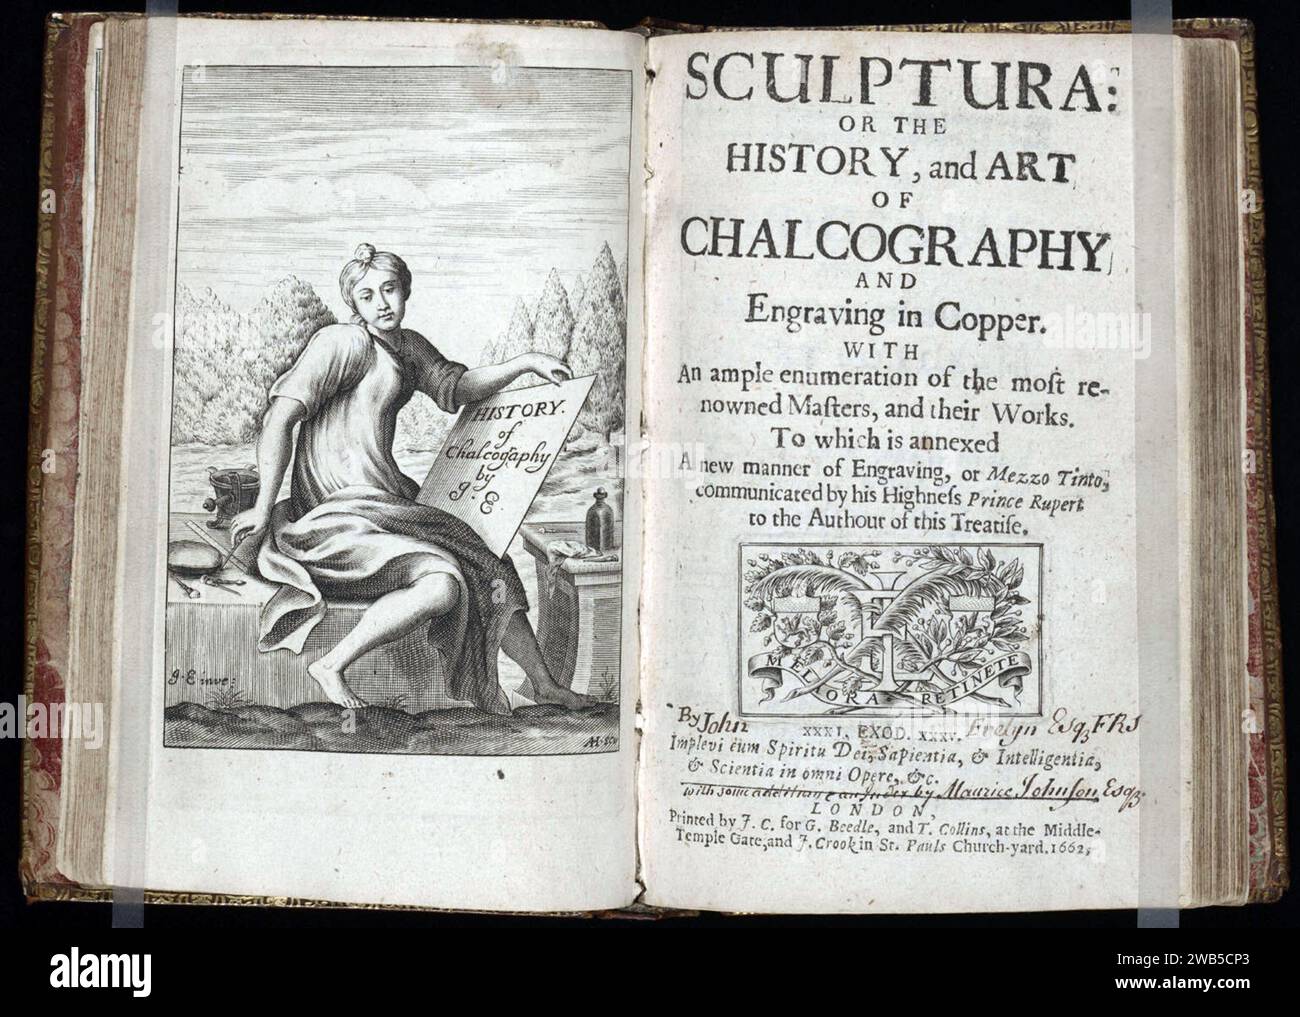 Sculptura, 1662, with engraved frontispiece by Evelyn John Evelyn - Frontispiece and title page of 'Sculptura: or the History and Art of Chalcography and Engraving in Copper,' by the English writer John Evelyn Stock Photo